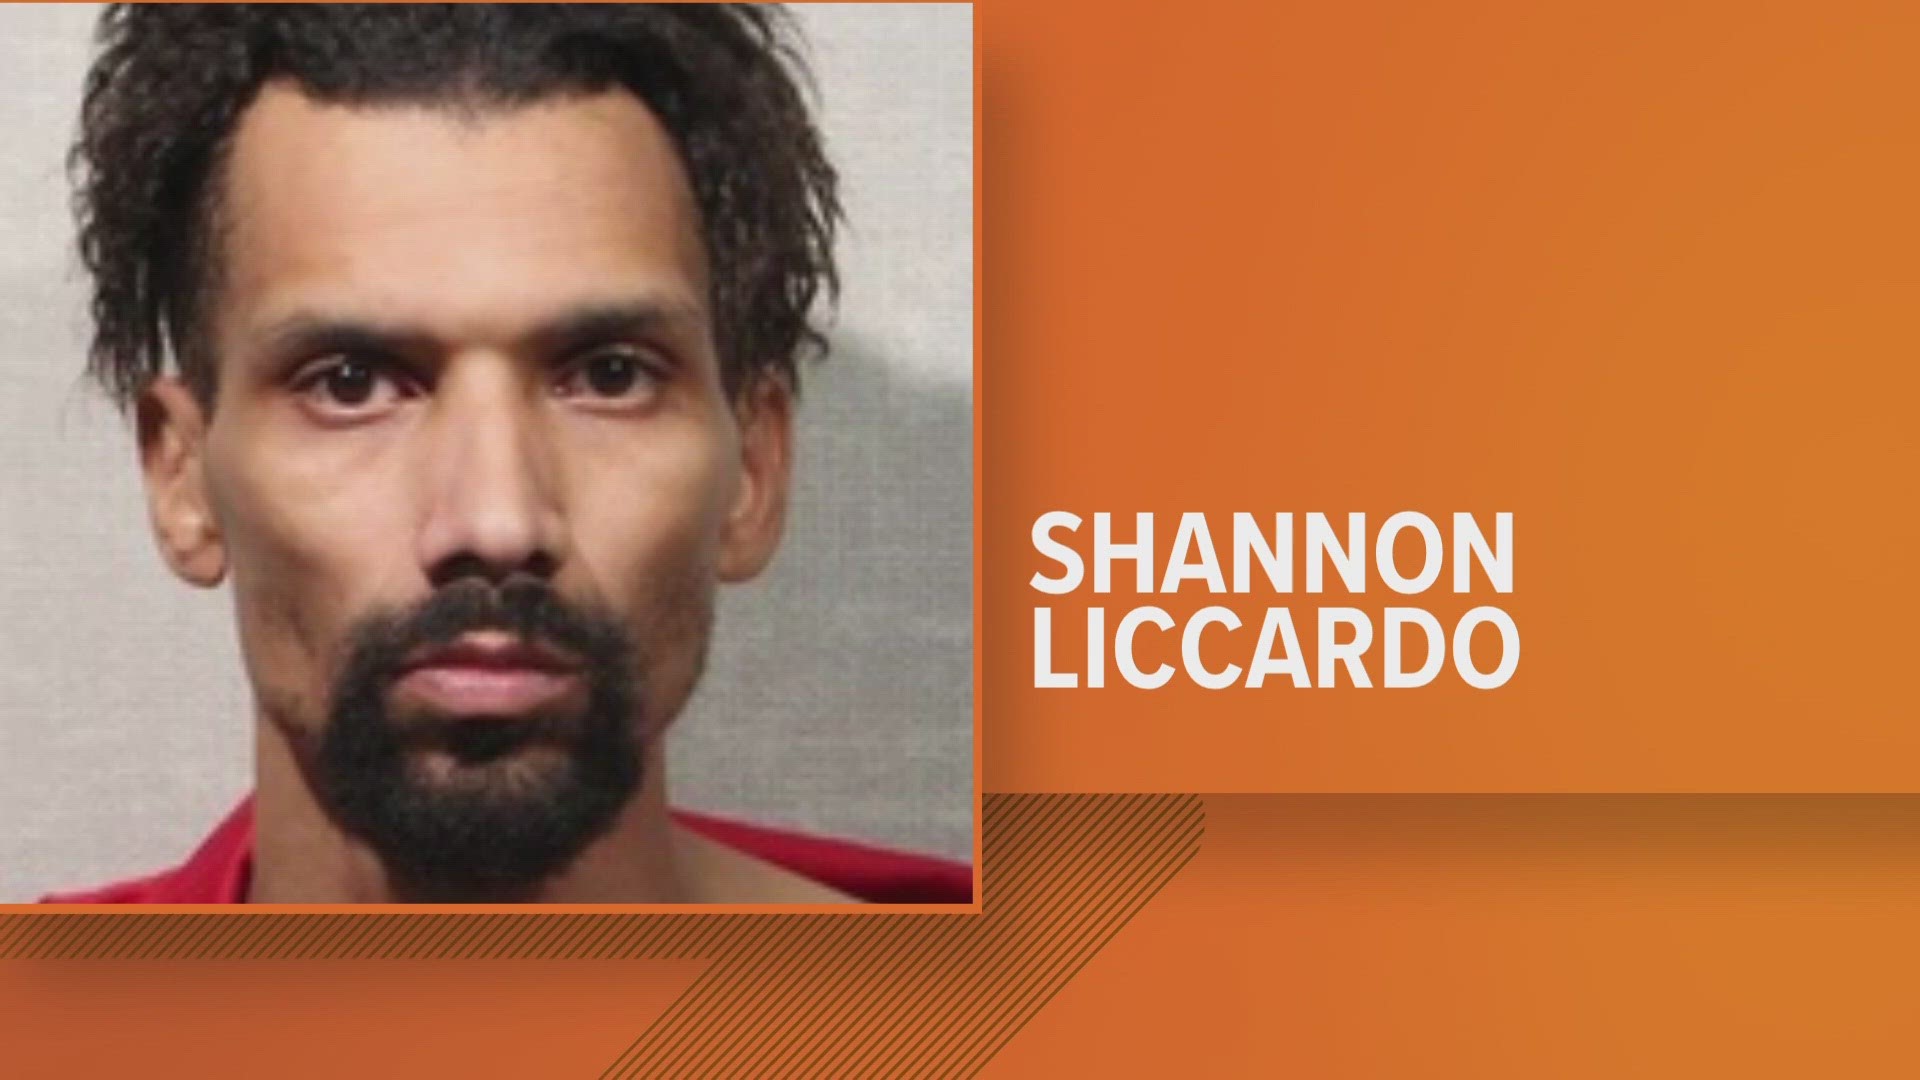 Shannon W. Liccardo, 34, is being held in the Jackson County Jail pending extradition back to Ohio.